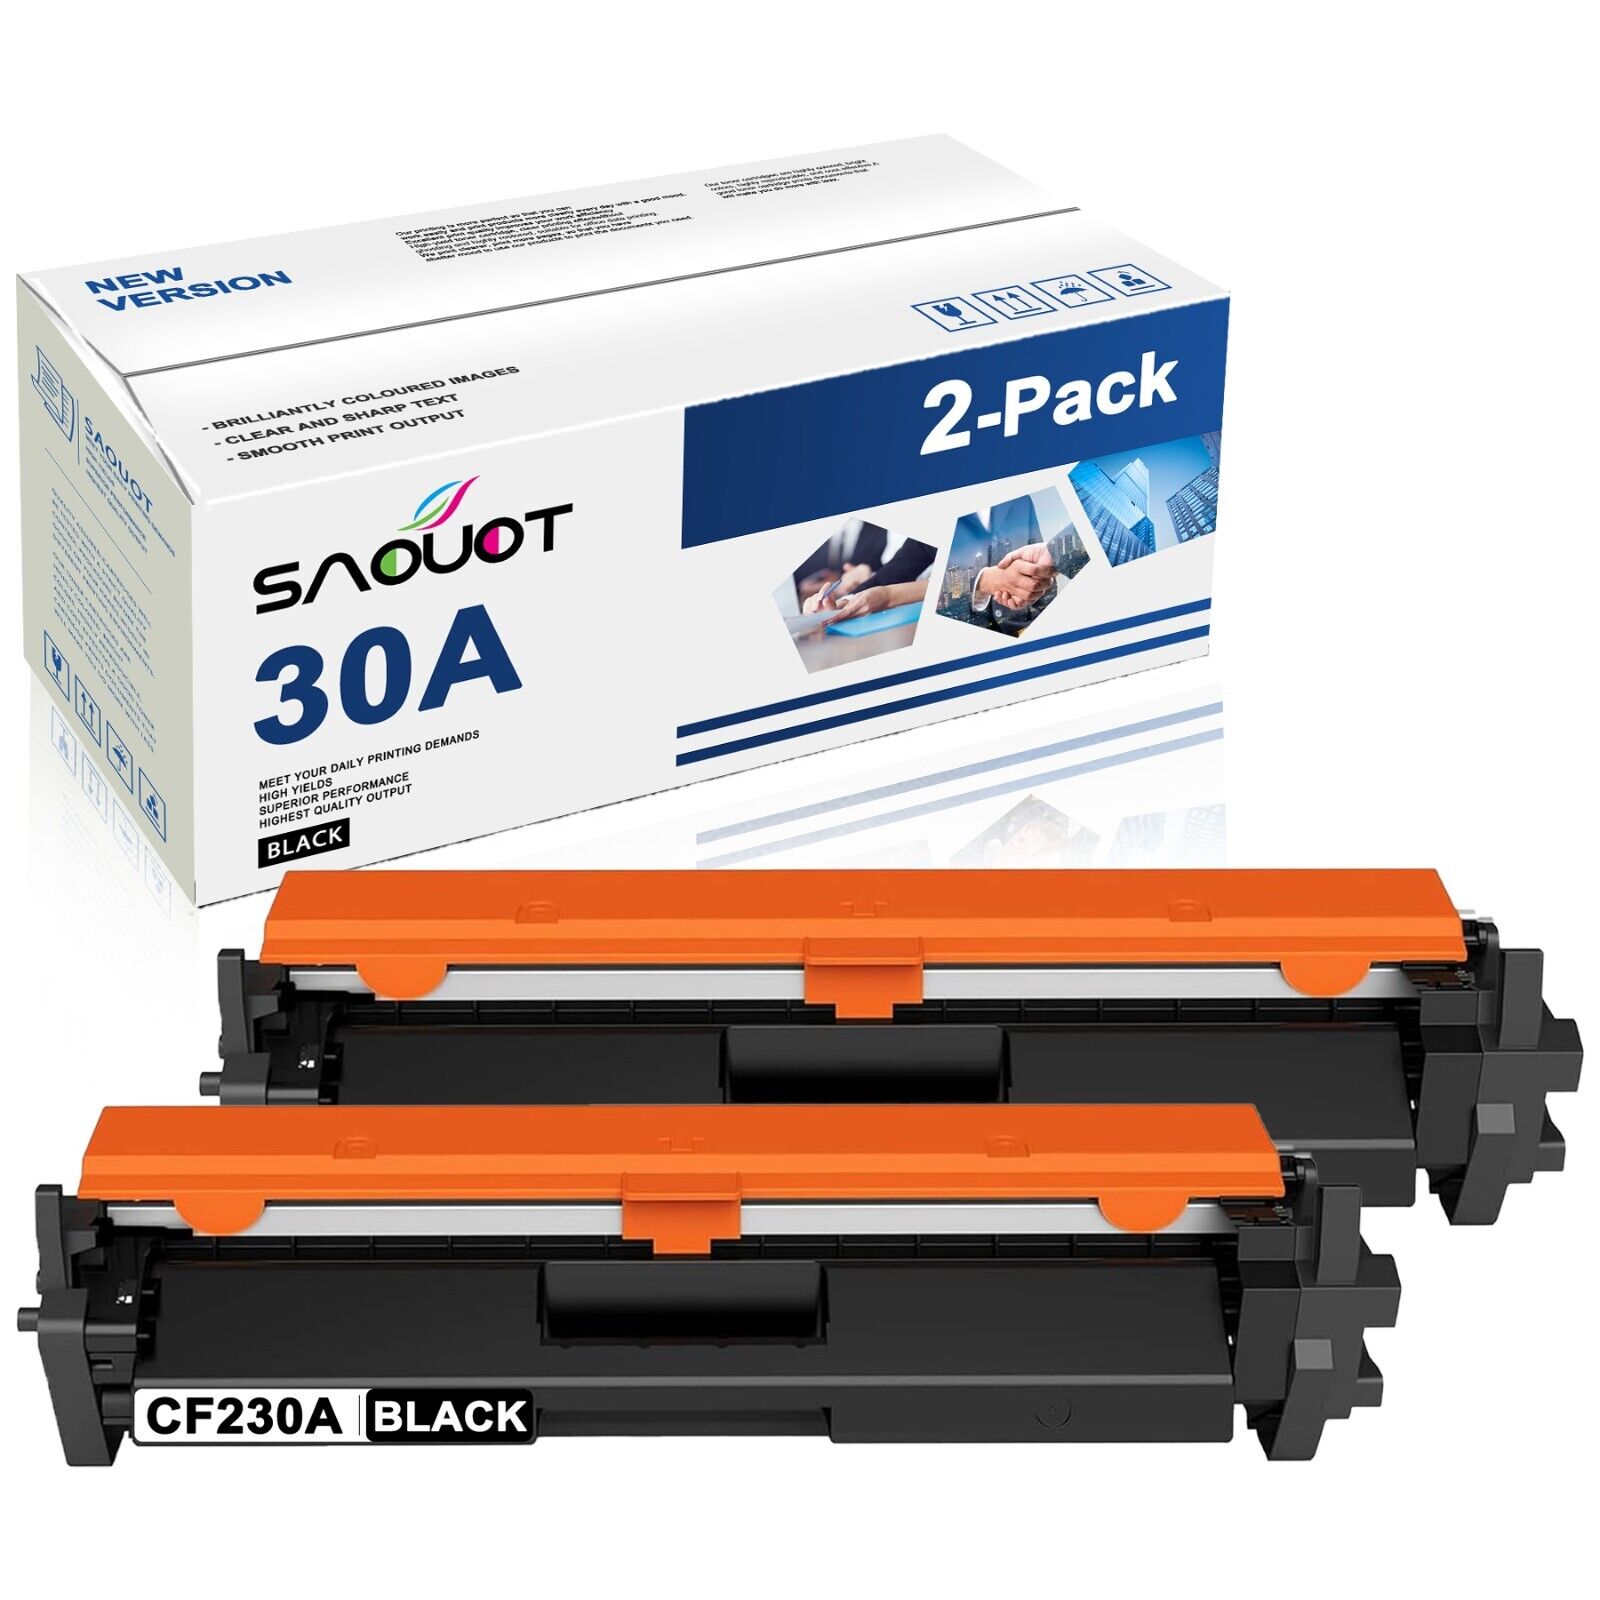 30A Toner CF230A Cartridge Replacement for HP 30A Black Pro MFP M227sdn